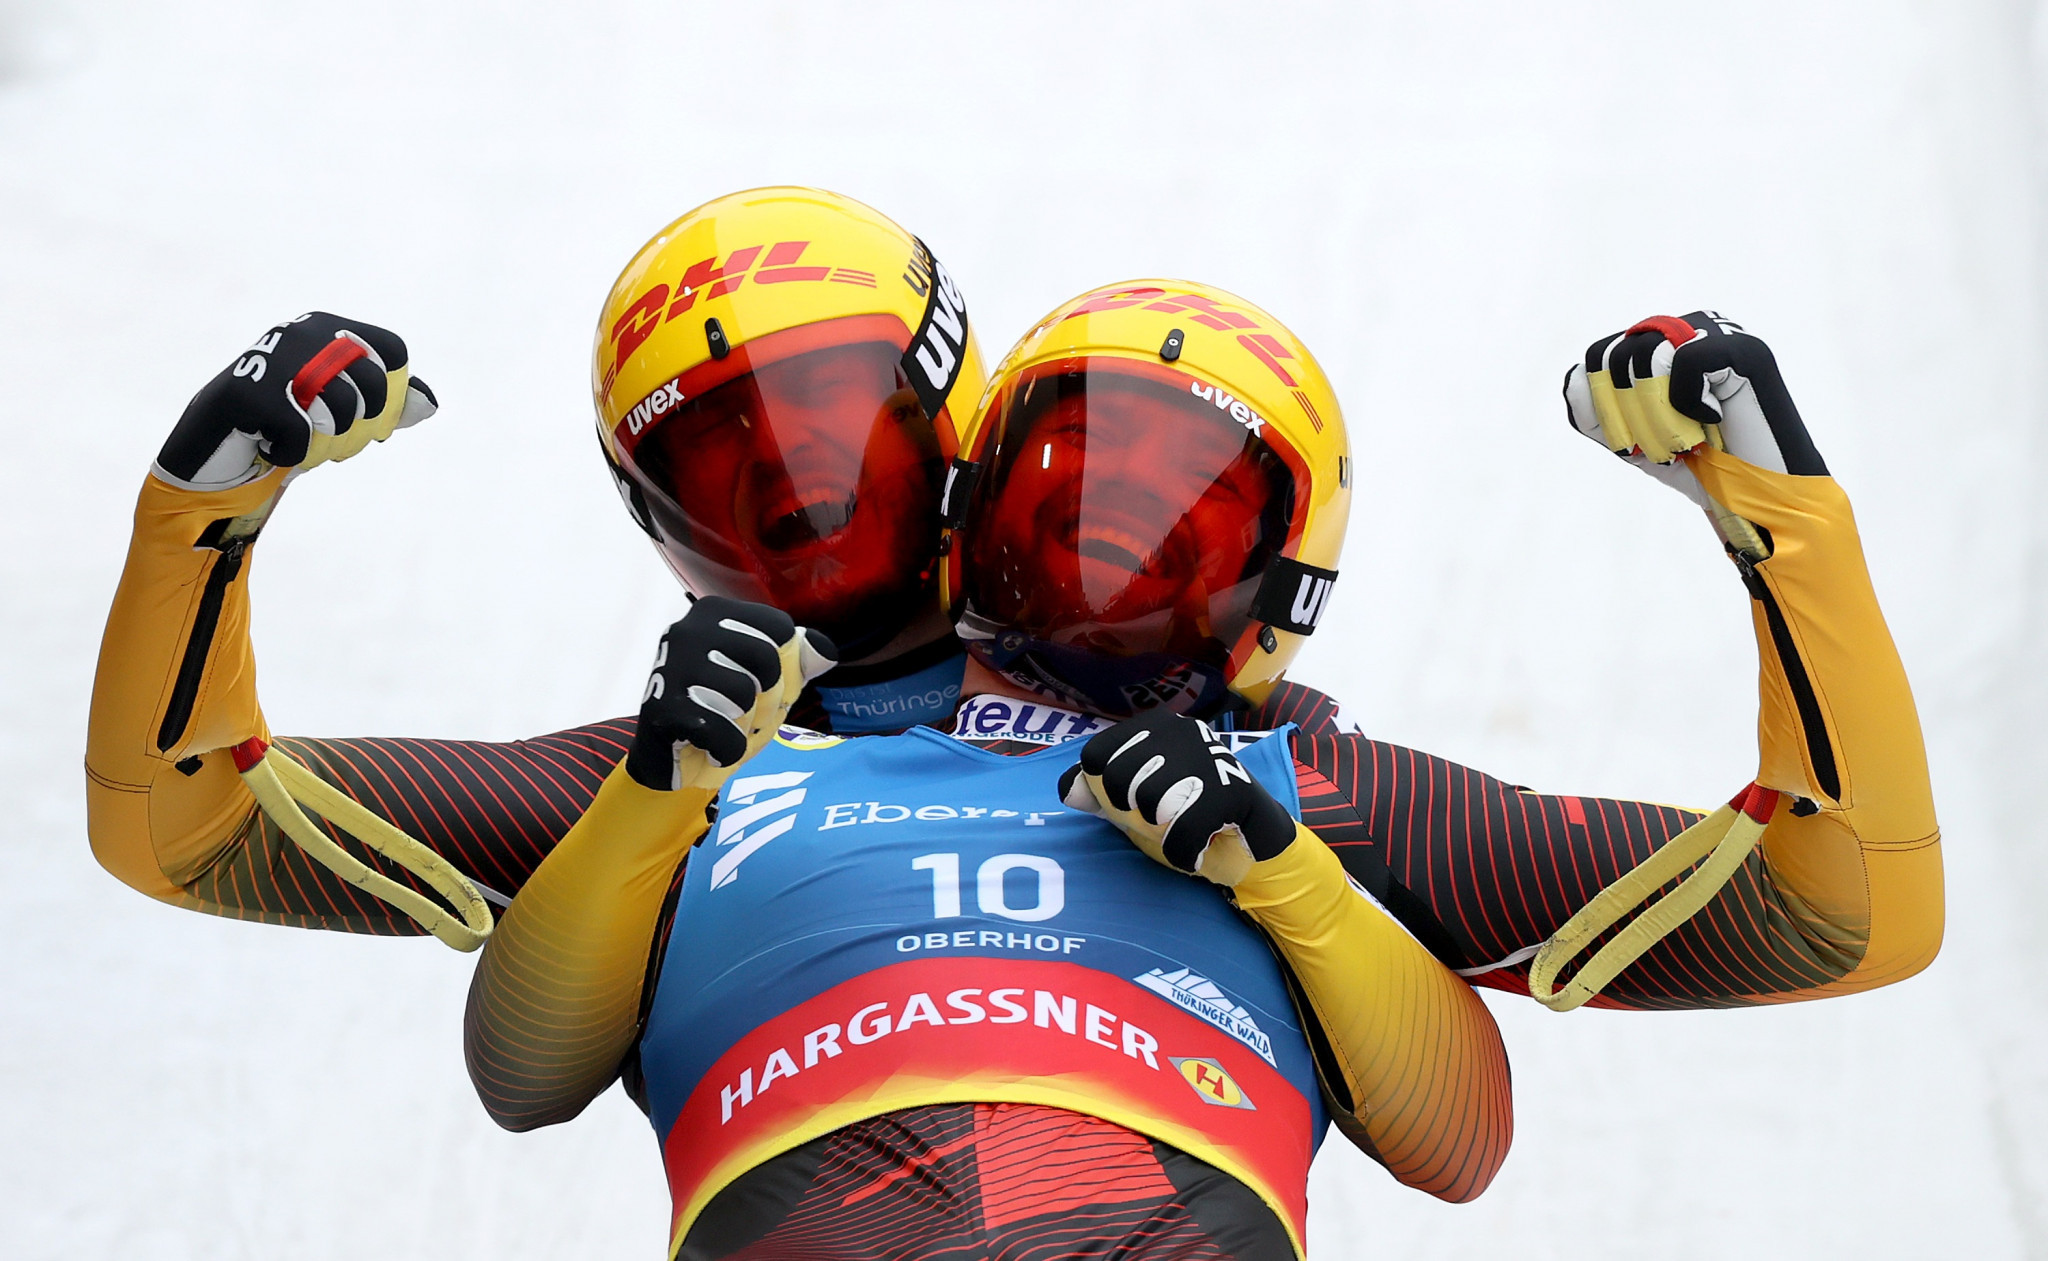 Toni Eggert and Sascha Benecken of Germany claimed the men's doubles title in Altenberg ©Getty Images